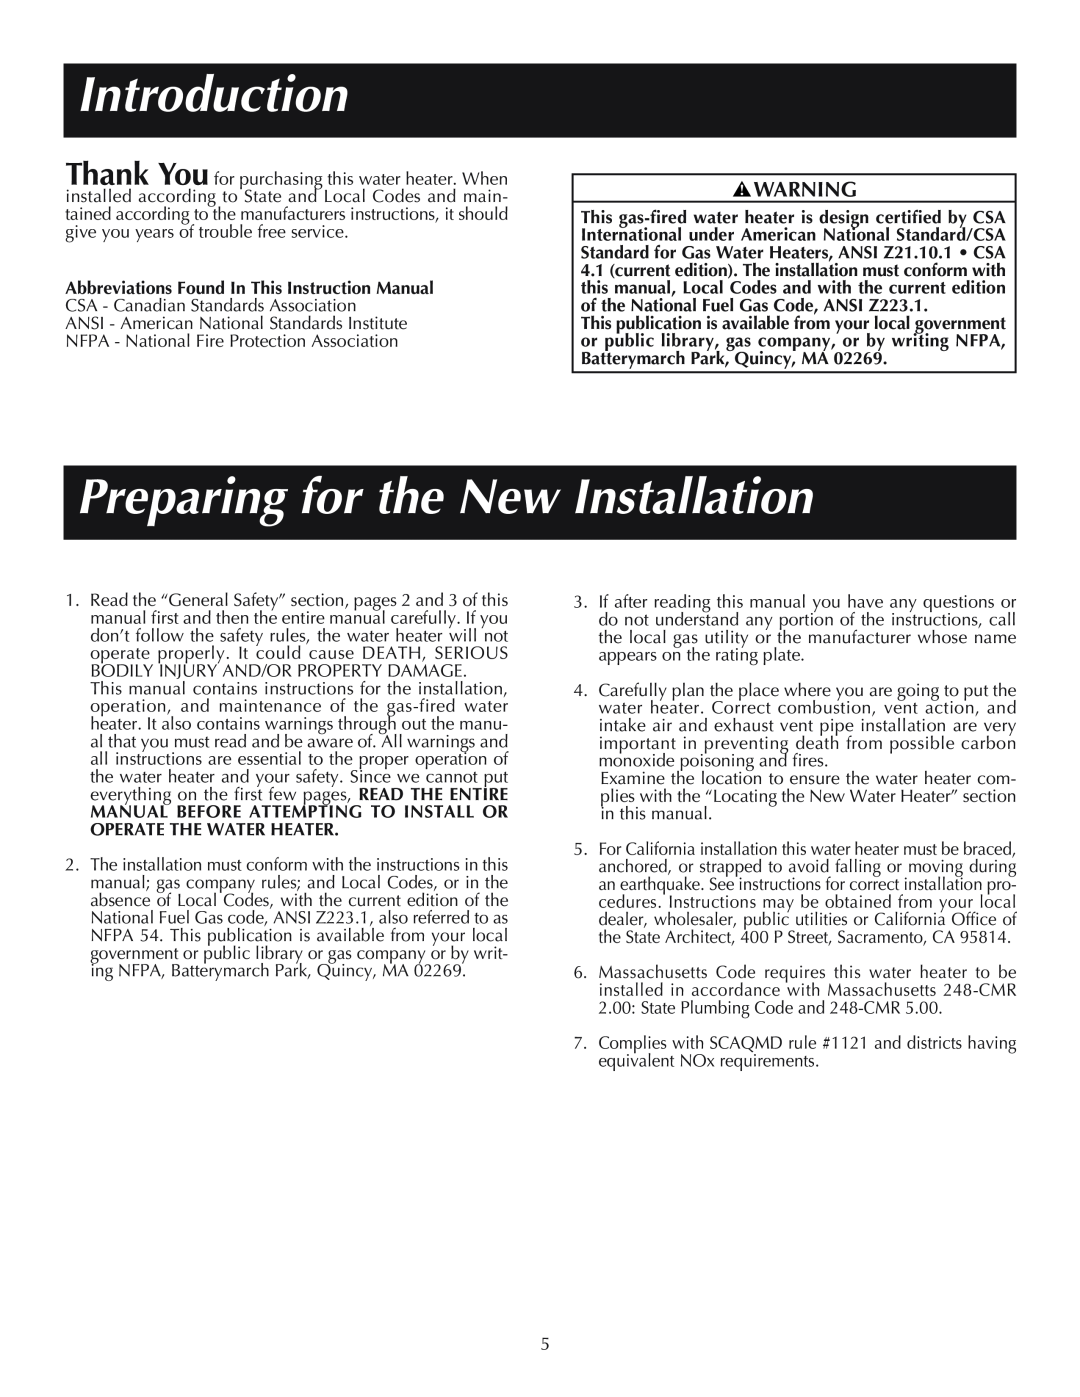 Reliance Water Heaters 184333-001, 606, 11-03 instruction manual Introduction, Preparing for the New Installation 